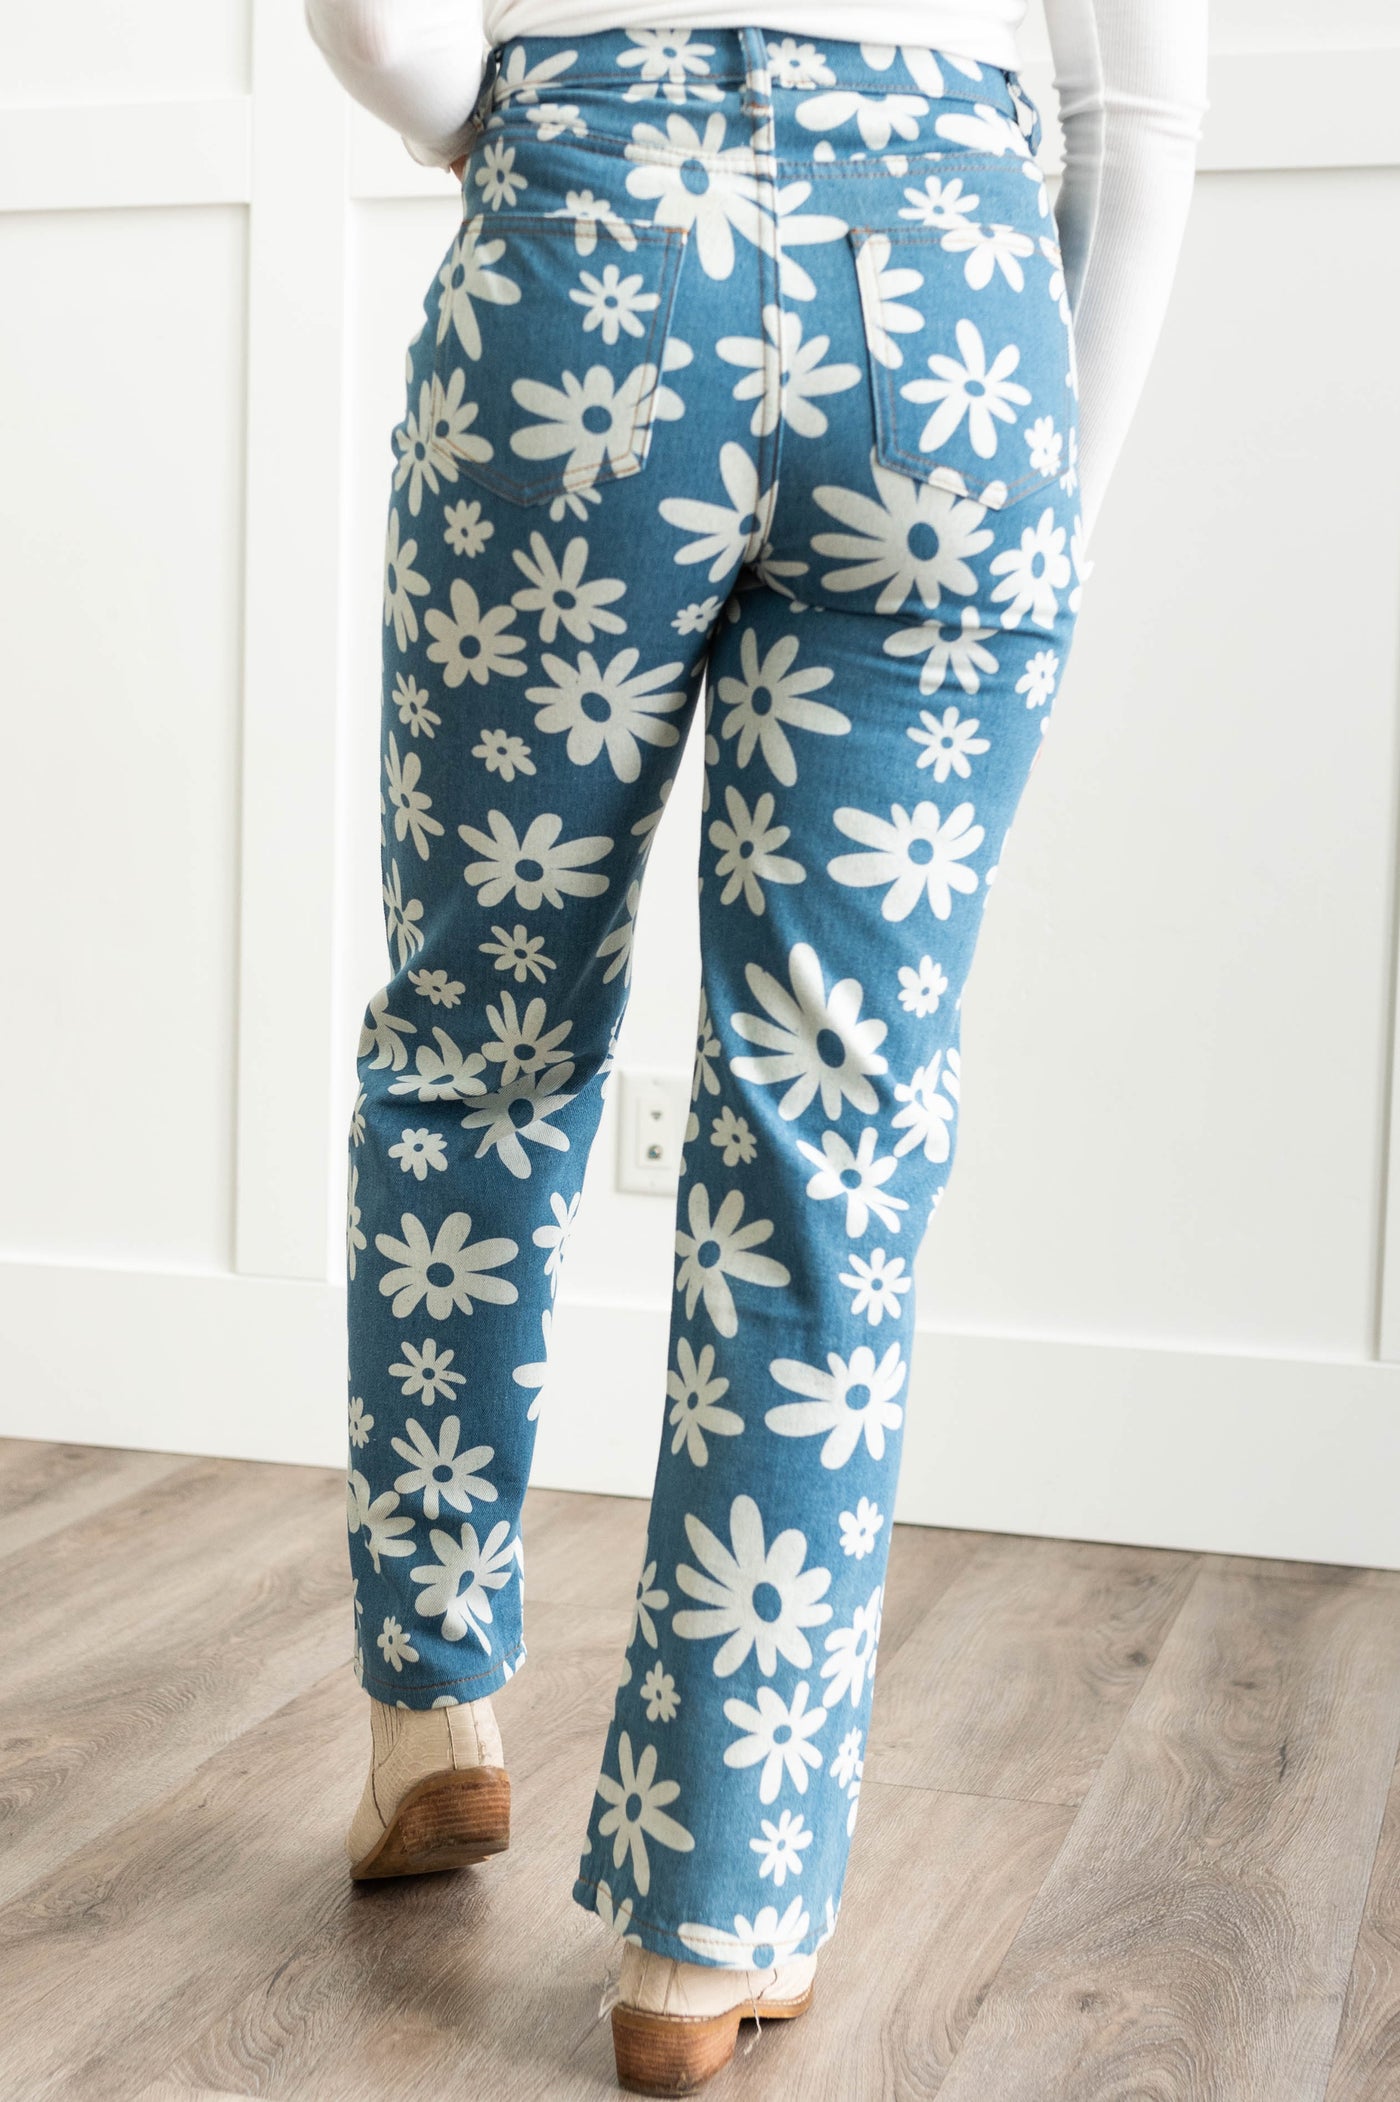 Back view of a blue pants with white daisies